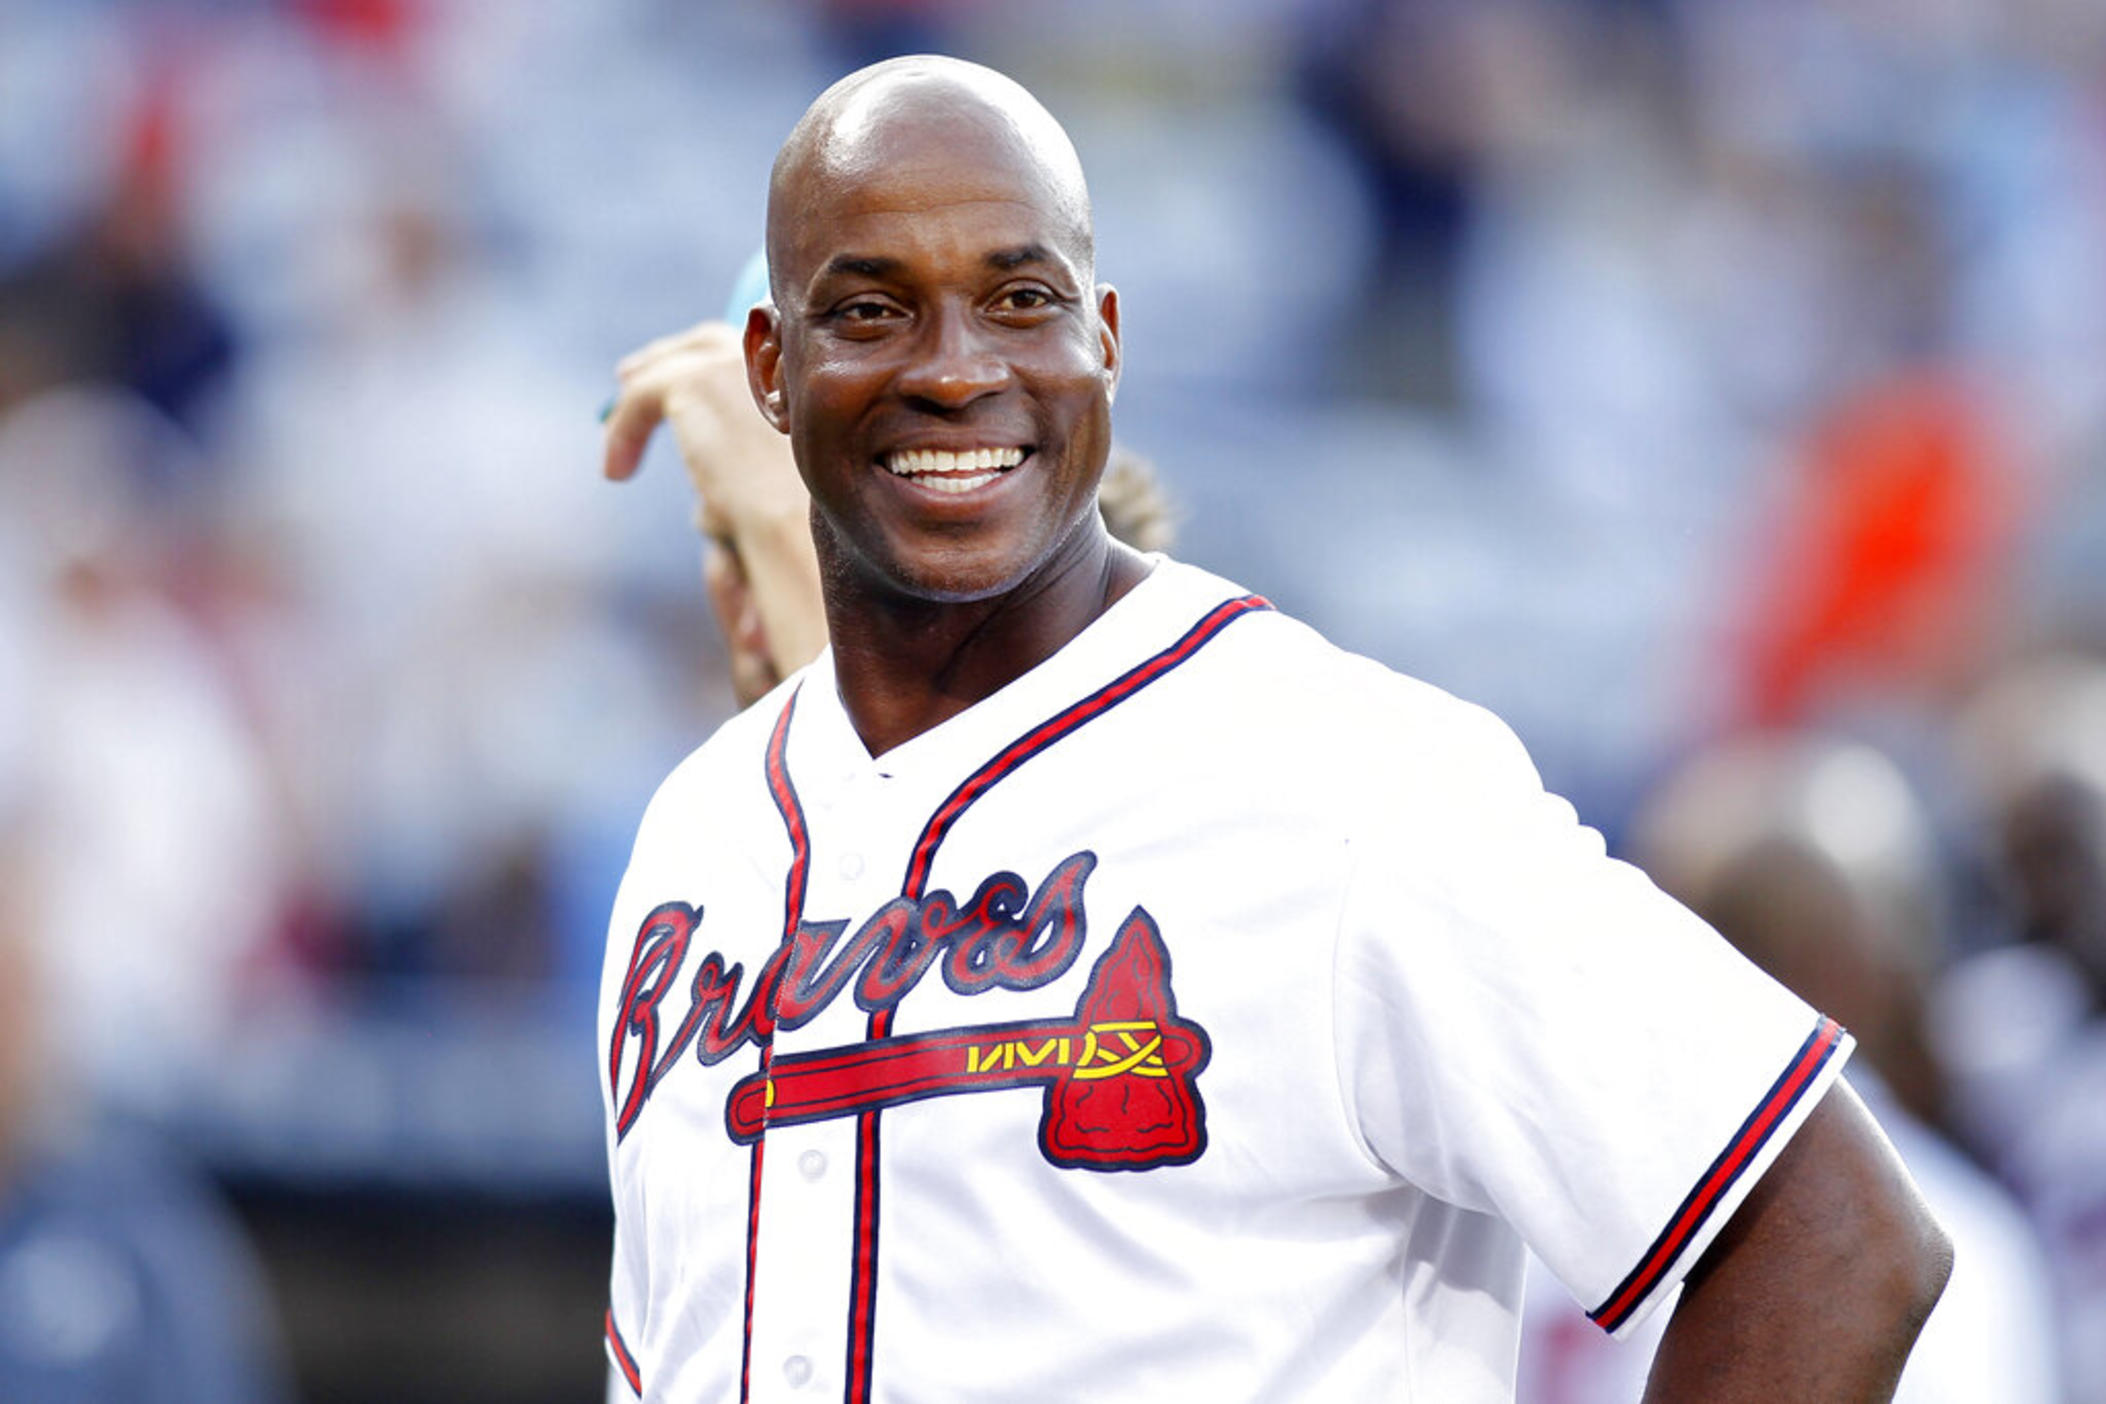 Former Atlanta Braves first baseman Fred McGriff smiles on the field before a baseball game against the Miami Marlins, Friday, Aug. 7, 2015, in Atlanta. Barry Bonds, Roger Clemens and Curt Schilling were passed over by a Baseball Hall of Fame committee that elected former big league slugger Fred McGriff to Cooperstown on Sunday, Dec. 4, 2022.